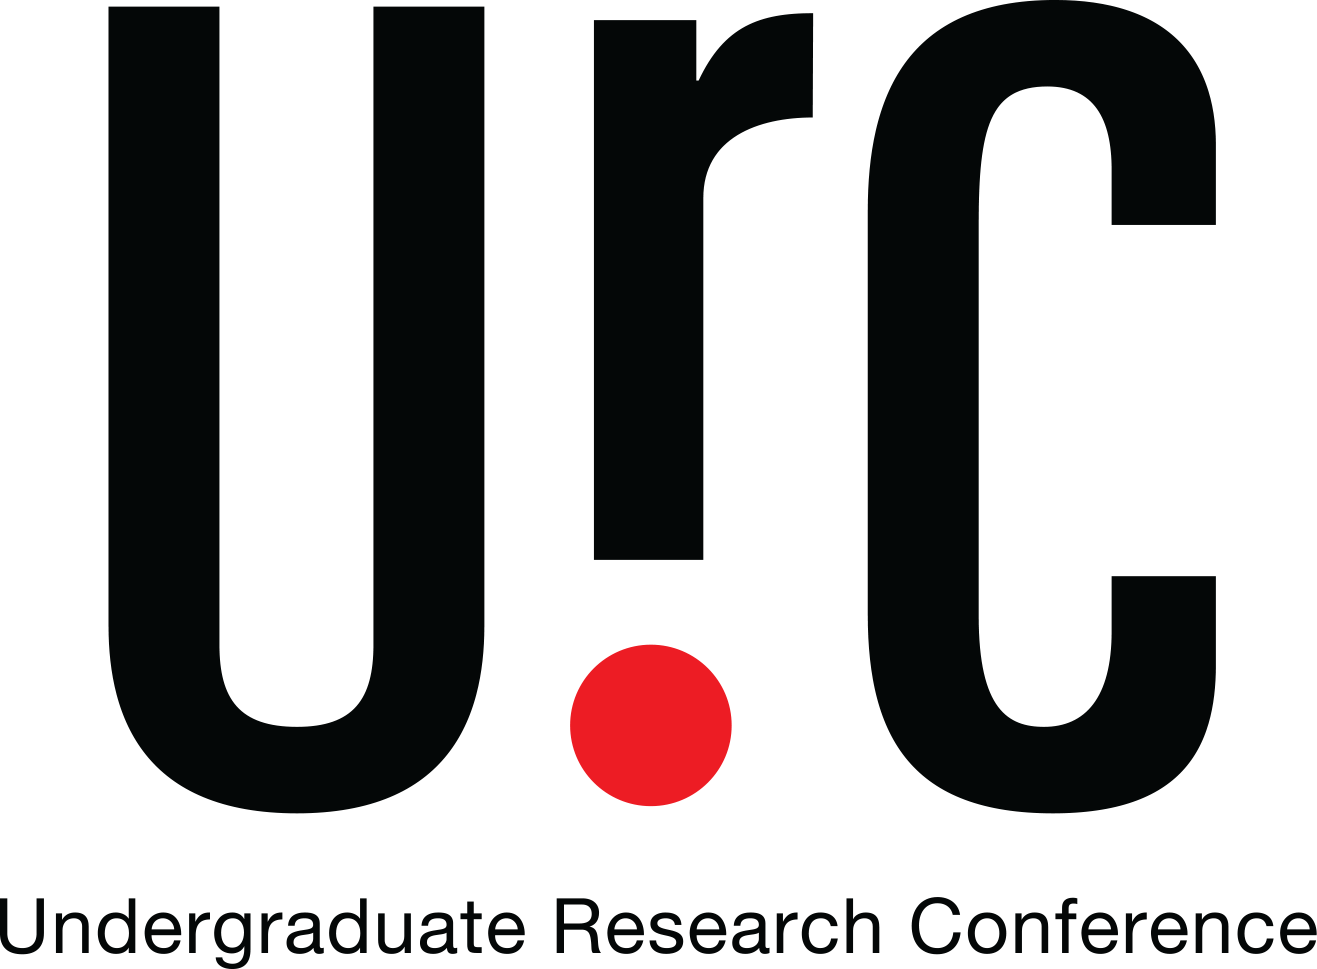 Undergraduate Research Conference Abstract Submission